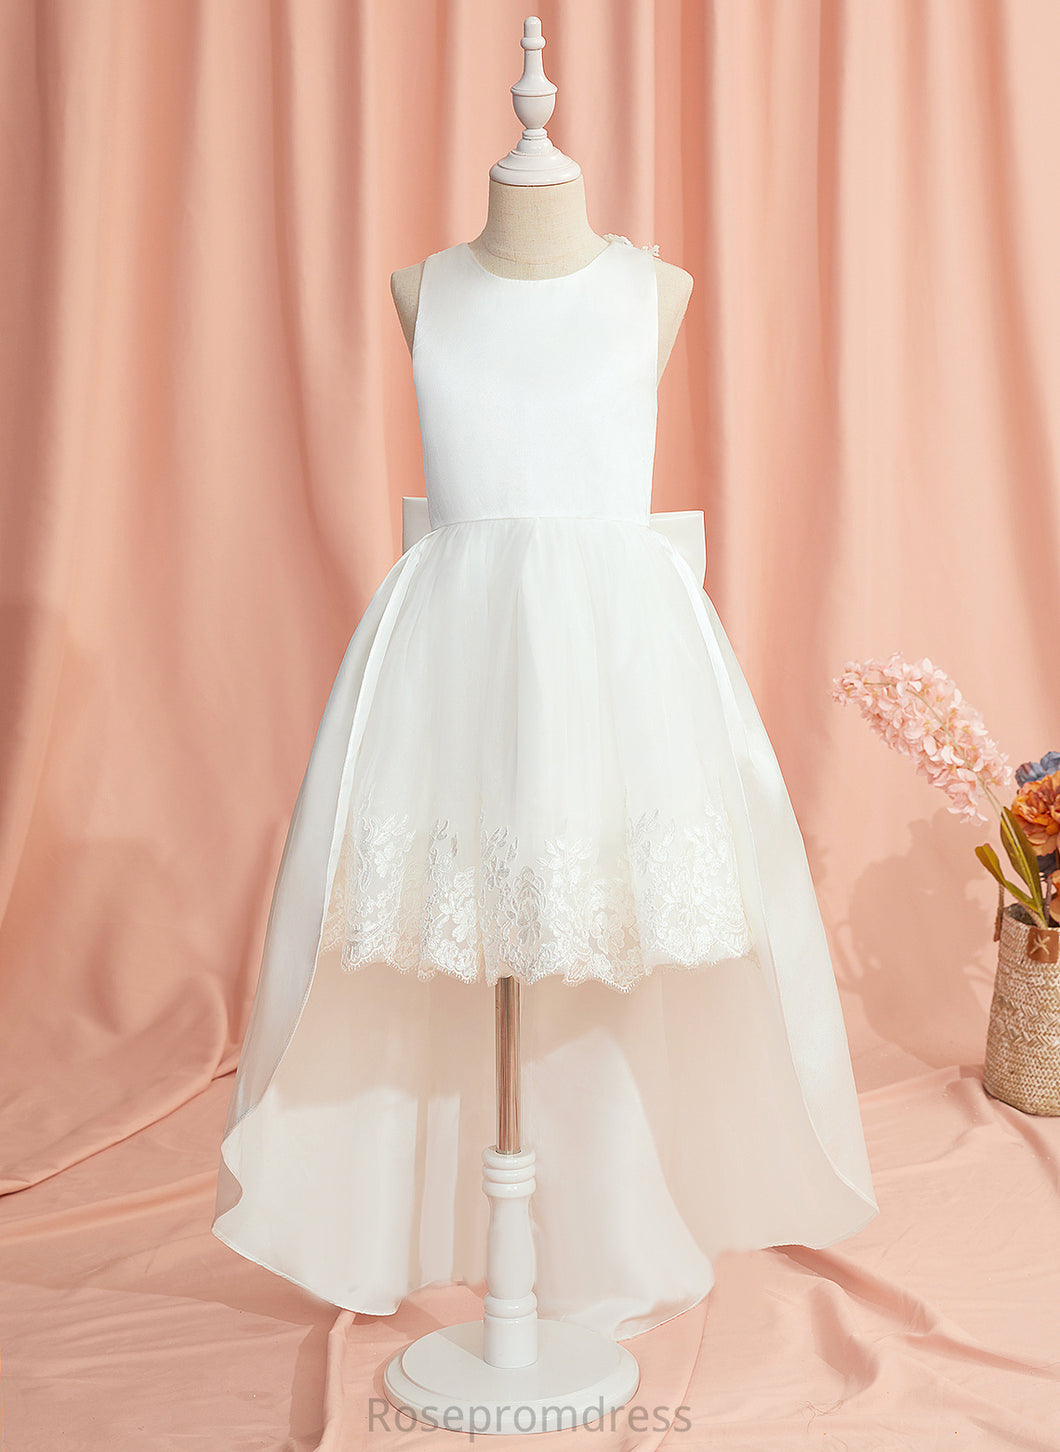 - Satin/Tulle Dress Girl Sleeveless Scoop Lace/Bow(s) Neck Ball-Gown/Princess Asymmetrical Annalise Flower With Flower Girl Dresses